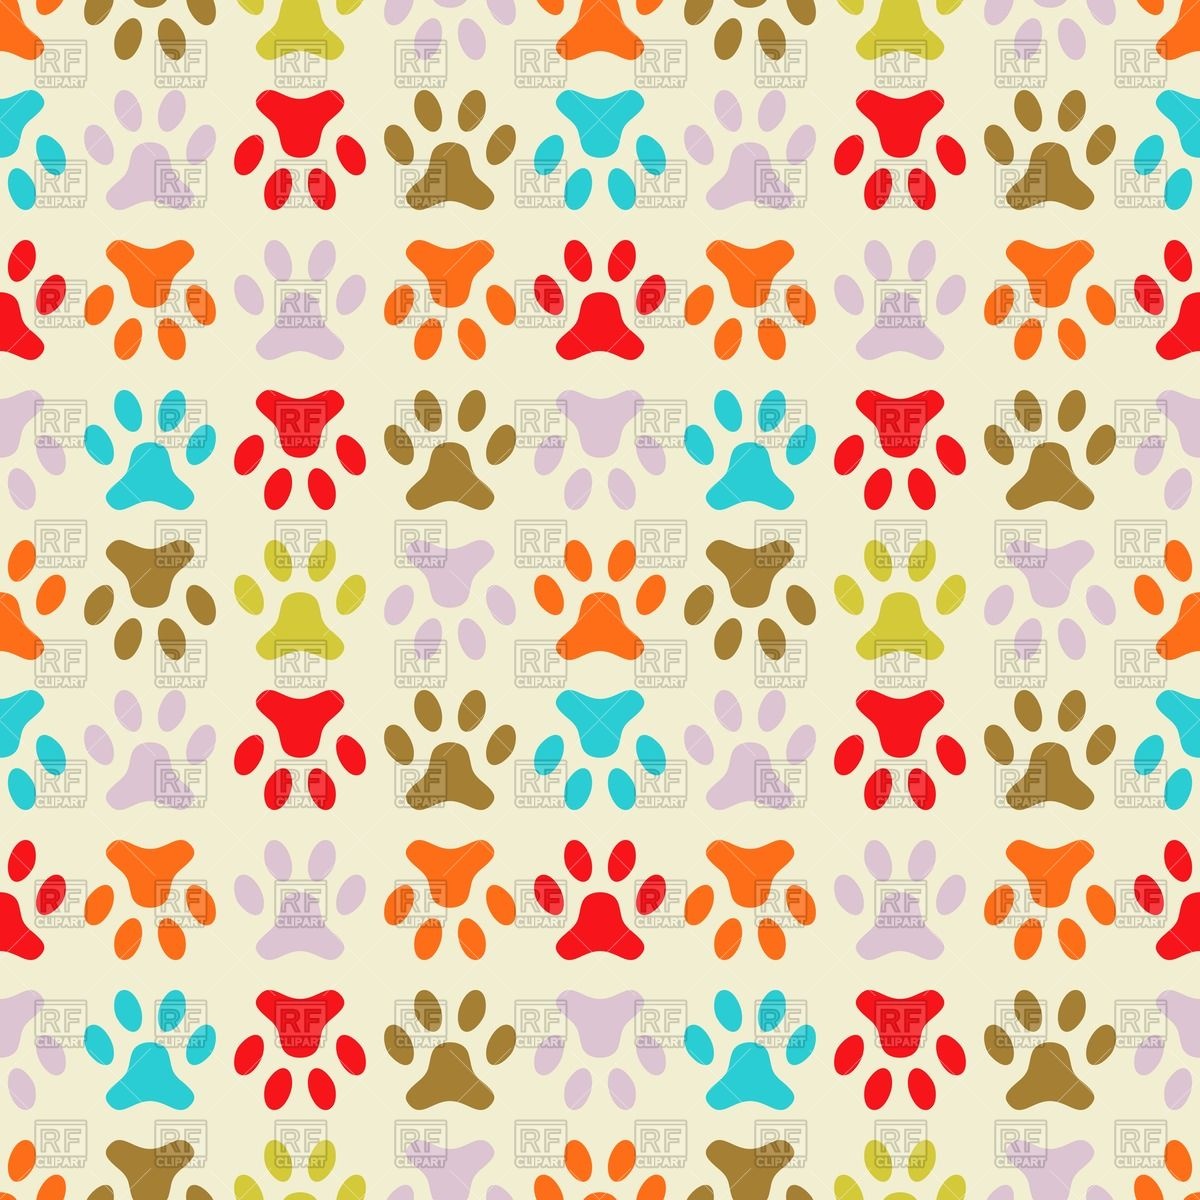 Colorful wallpaper with dogs paw prints Vector Image of